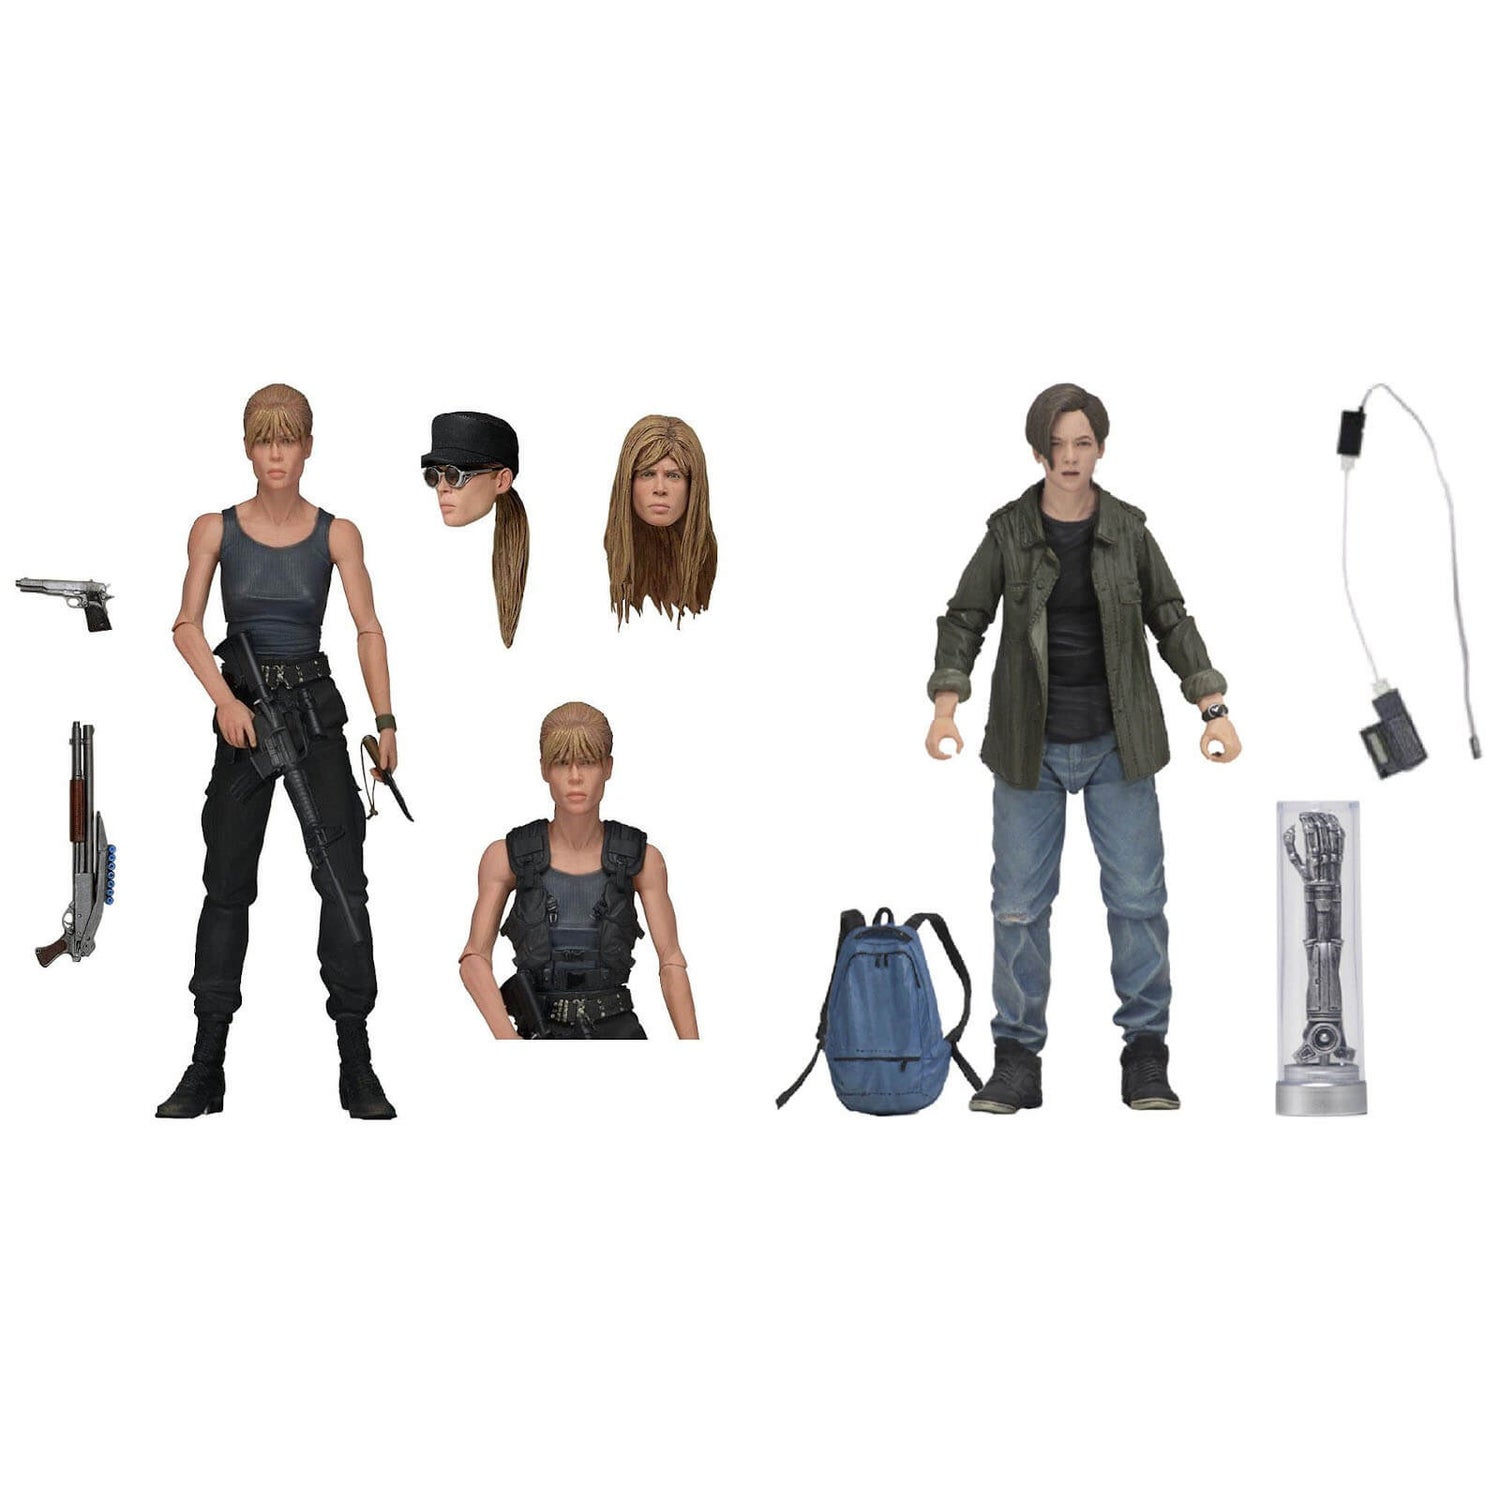 42179 for sale online NECA Terminator 2 Sarah Connor and John Connor 7 inch Action Figure 